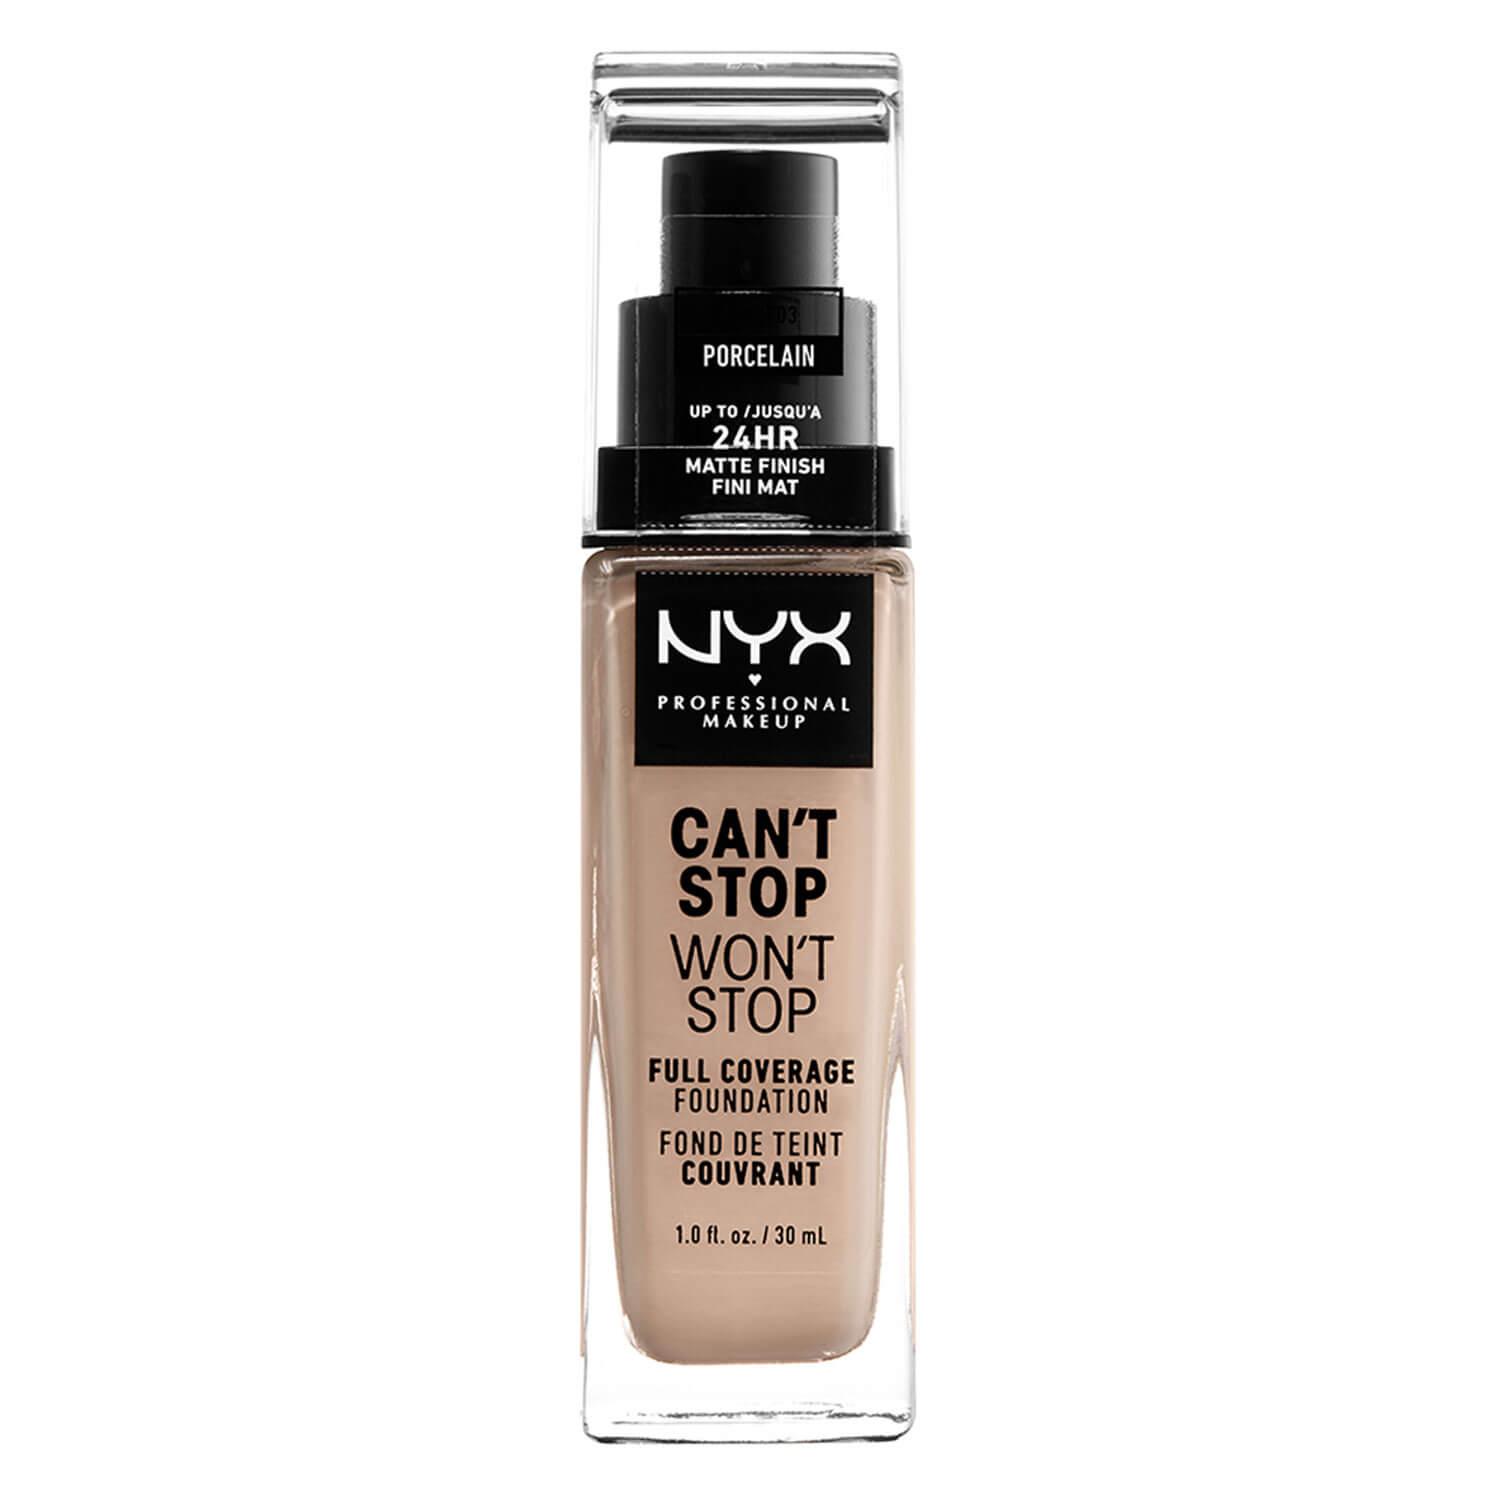 Can't Stop Won't Stop - Full Coverage Foundation Porcelain